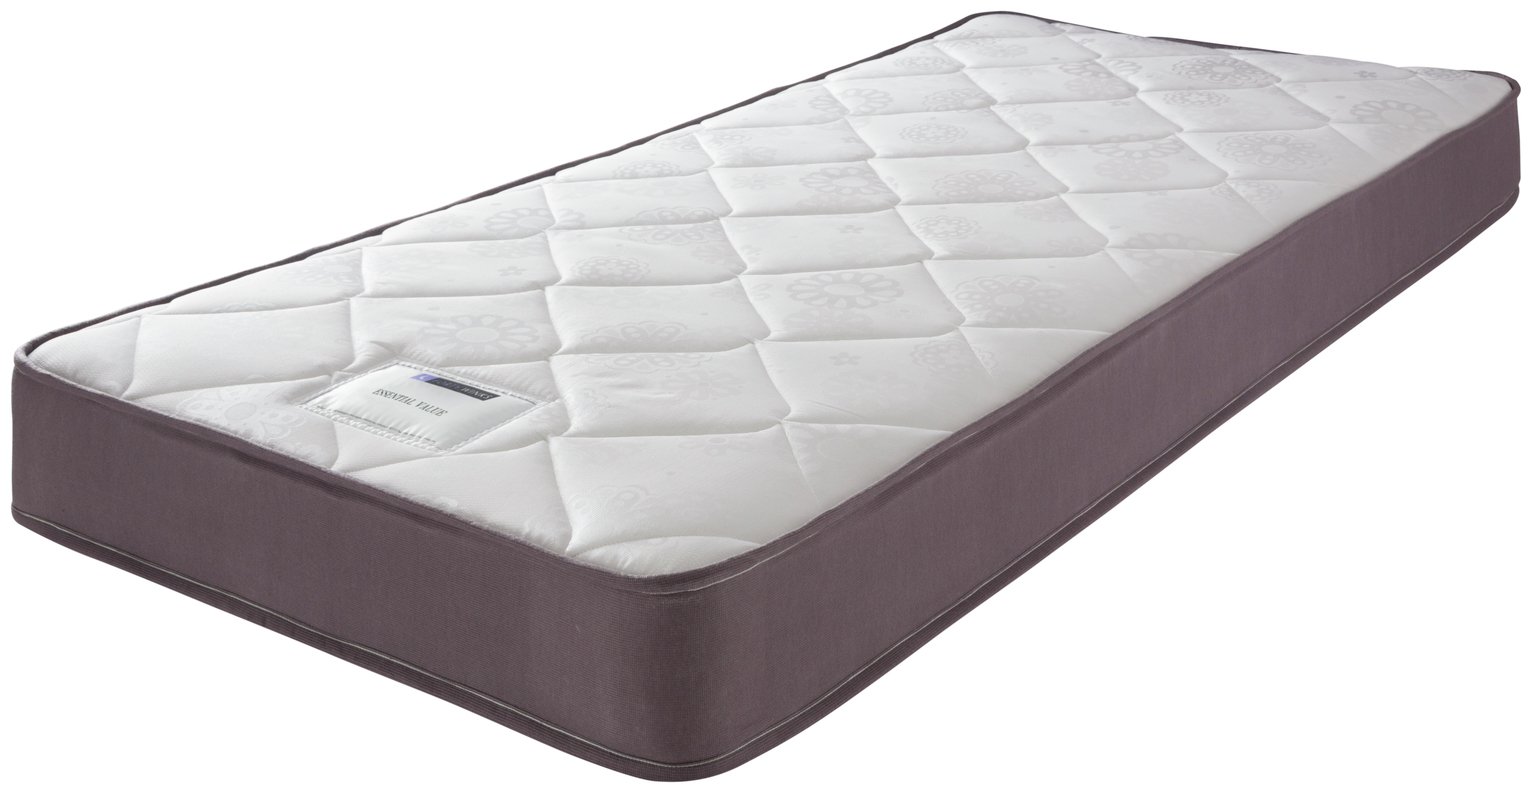 forty two mattress review